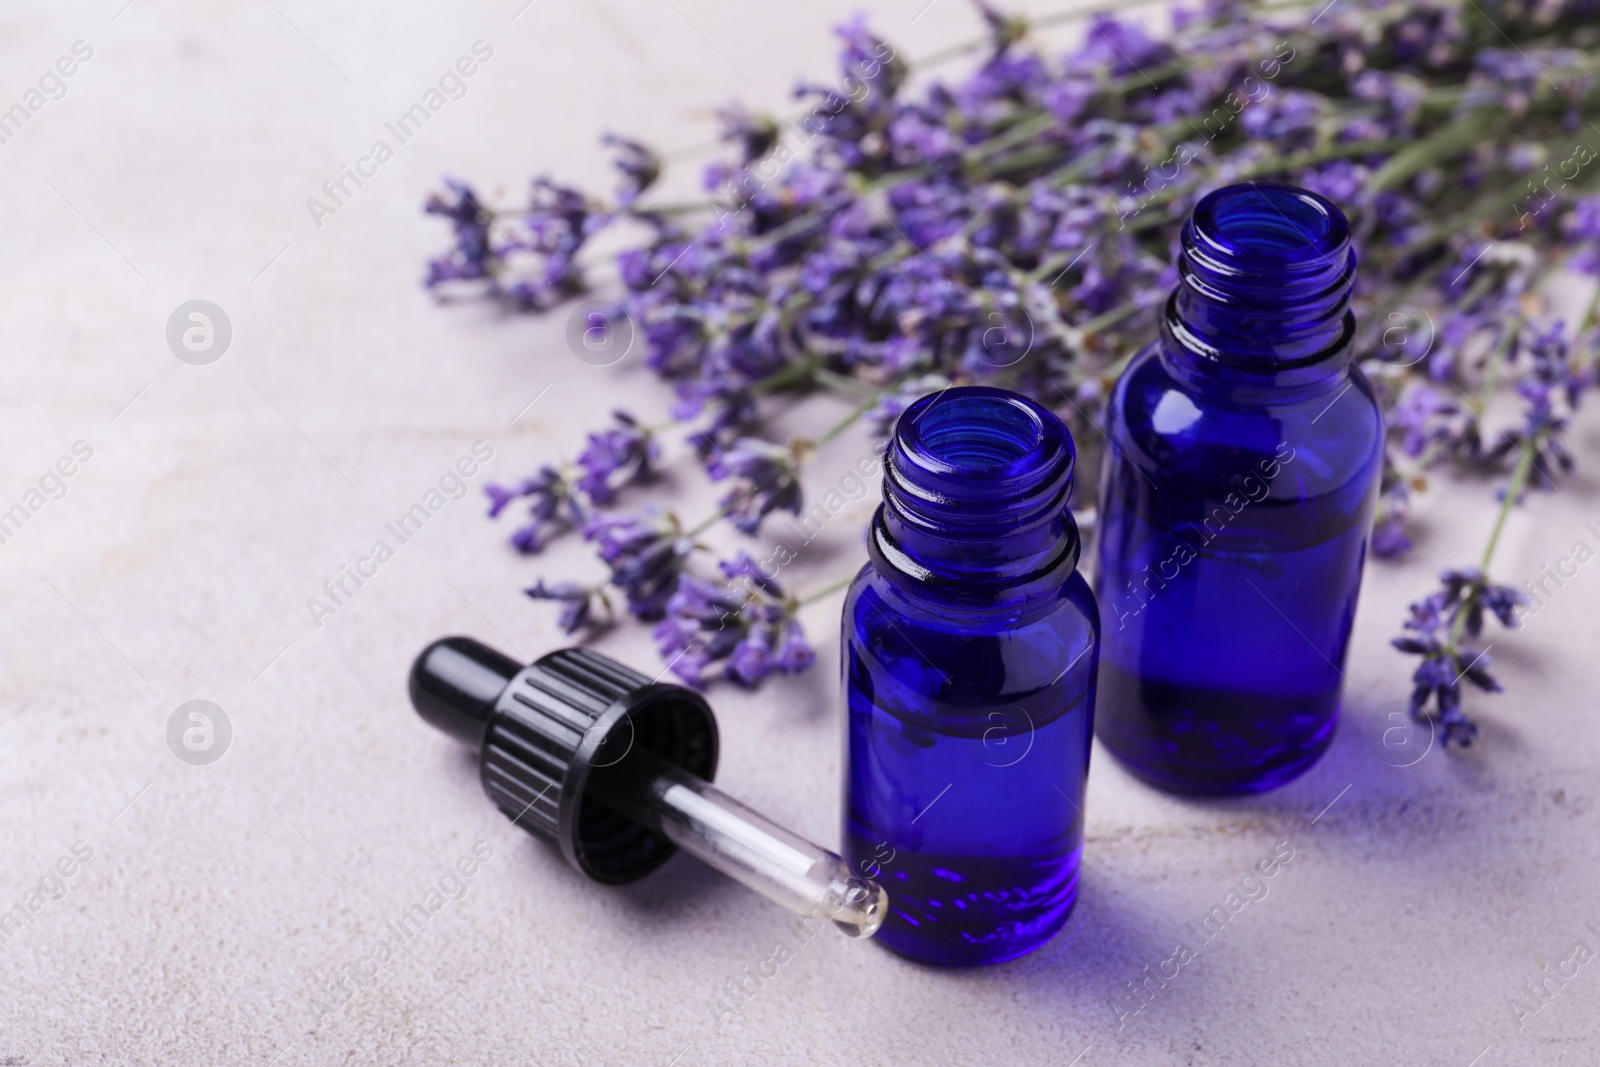 Photo of Bottles of essential oil and lavender flowers on stone background